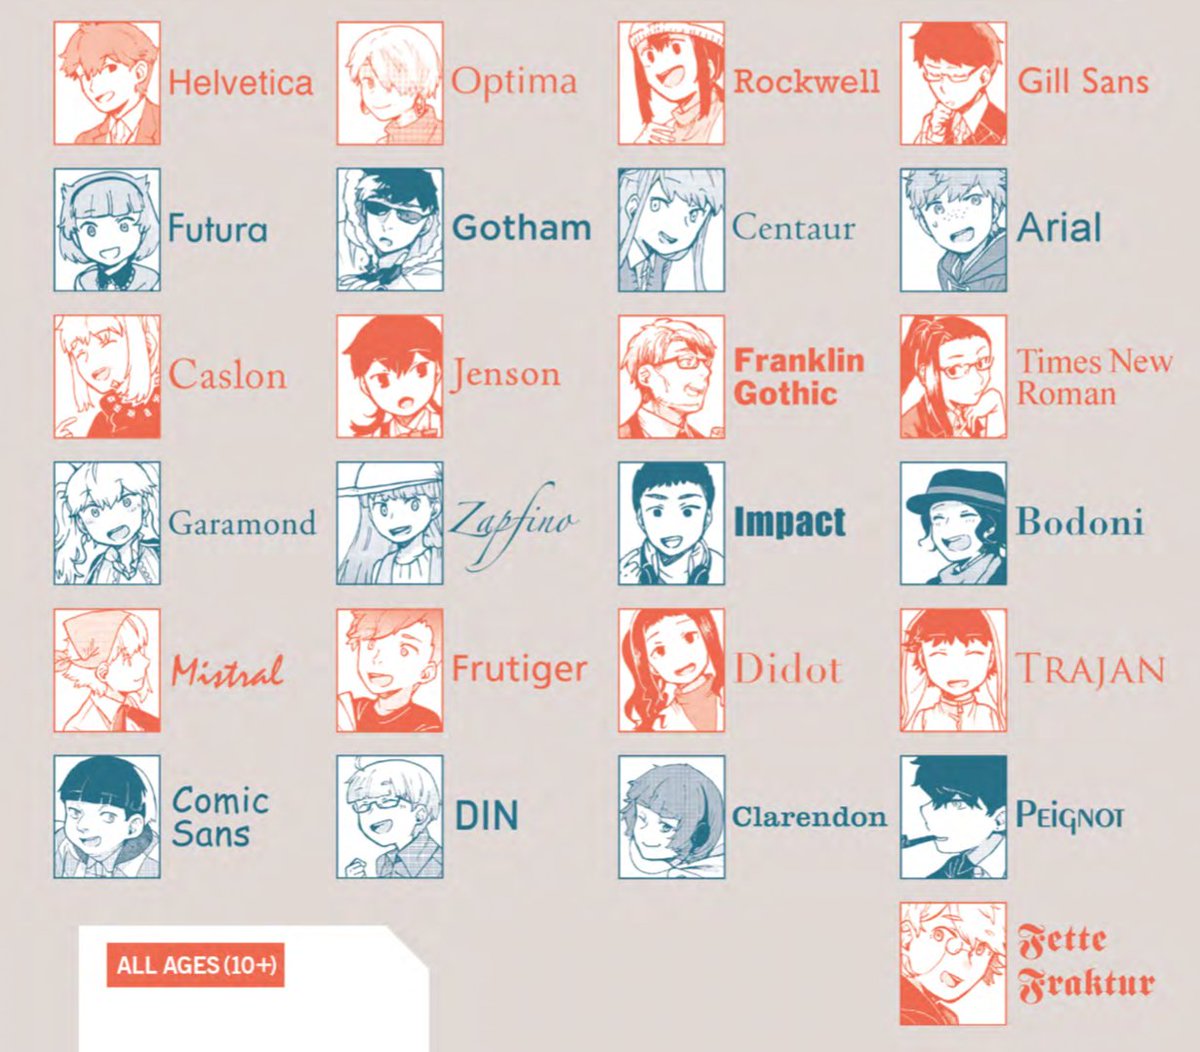 Here's the Manga Guide to Western Typeface cast list. Each gets a multi-page manga and text profile.